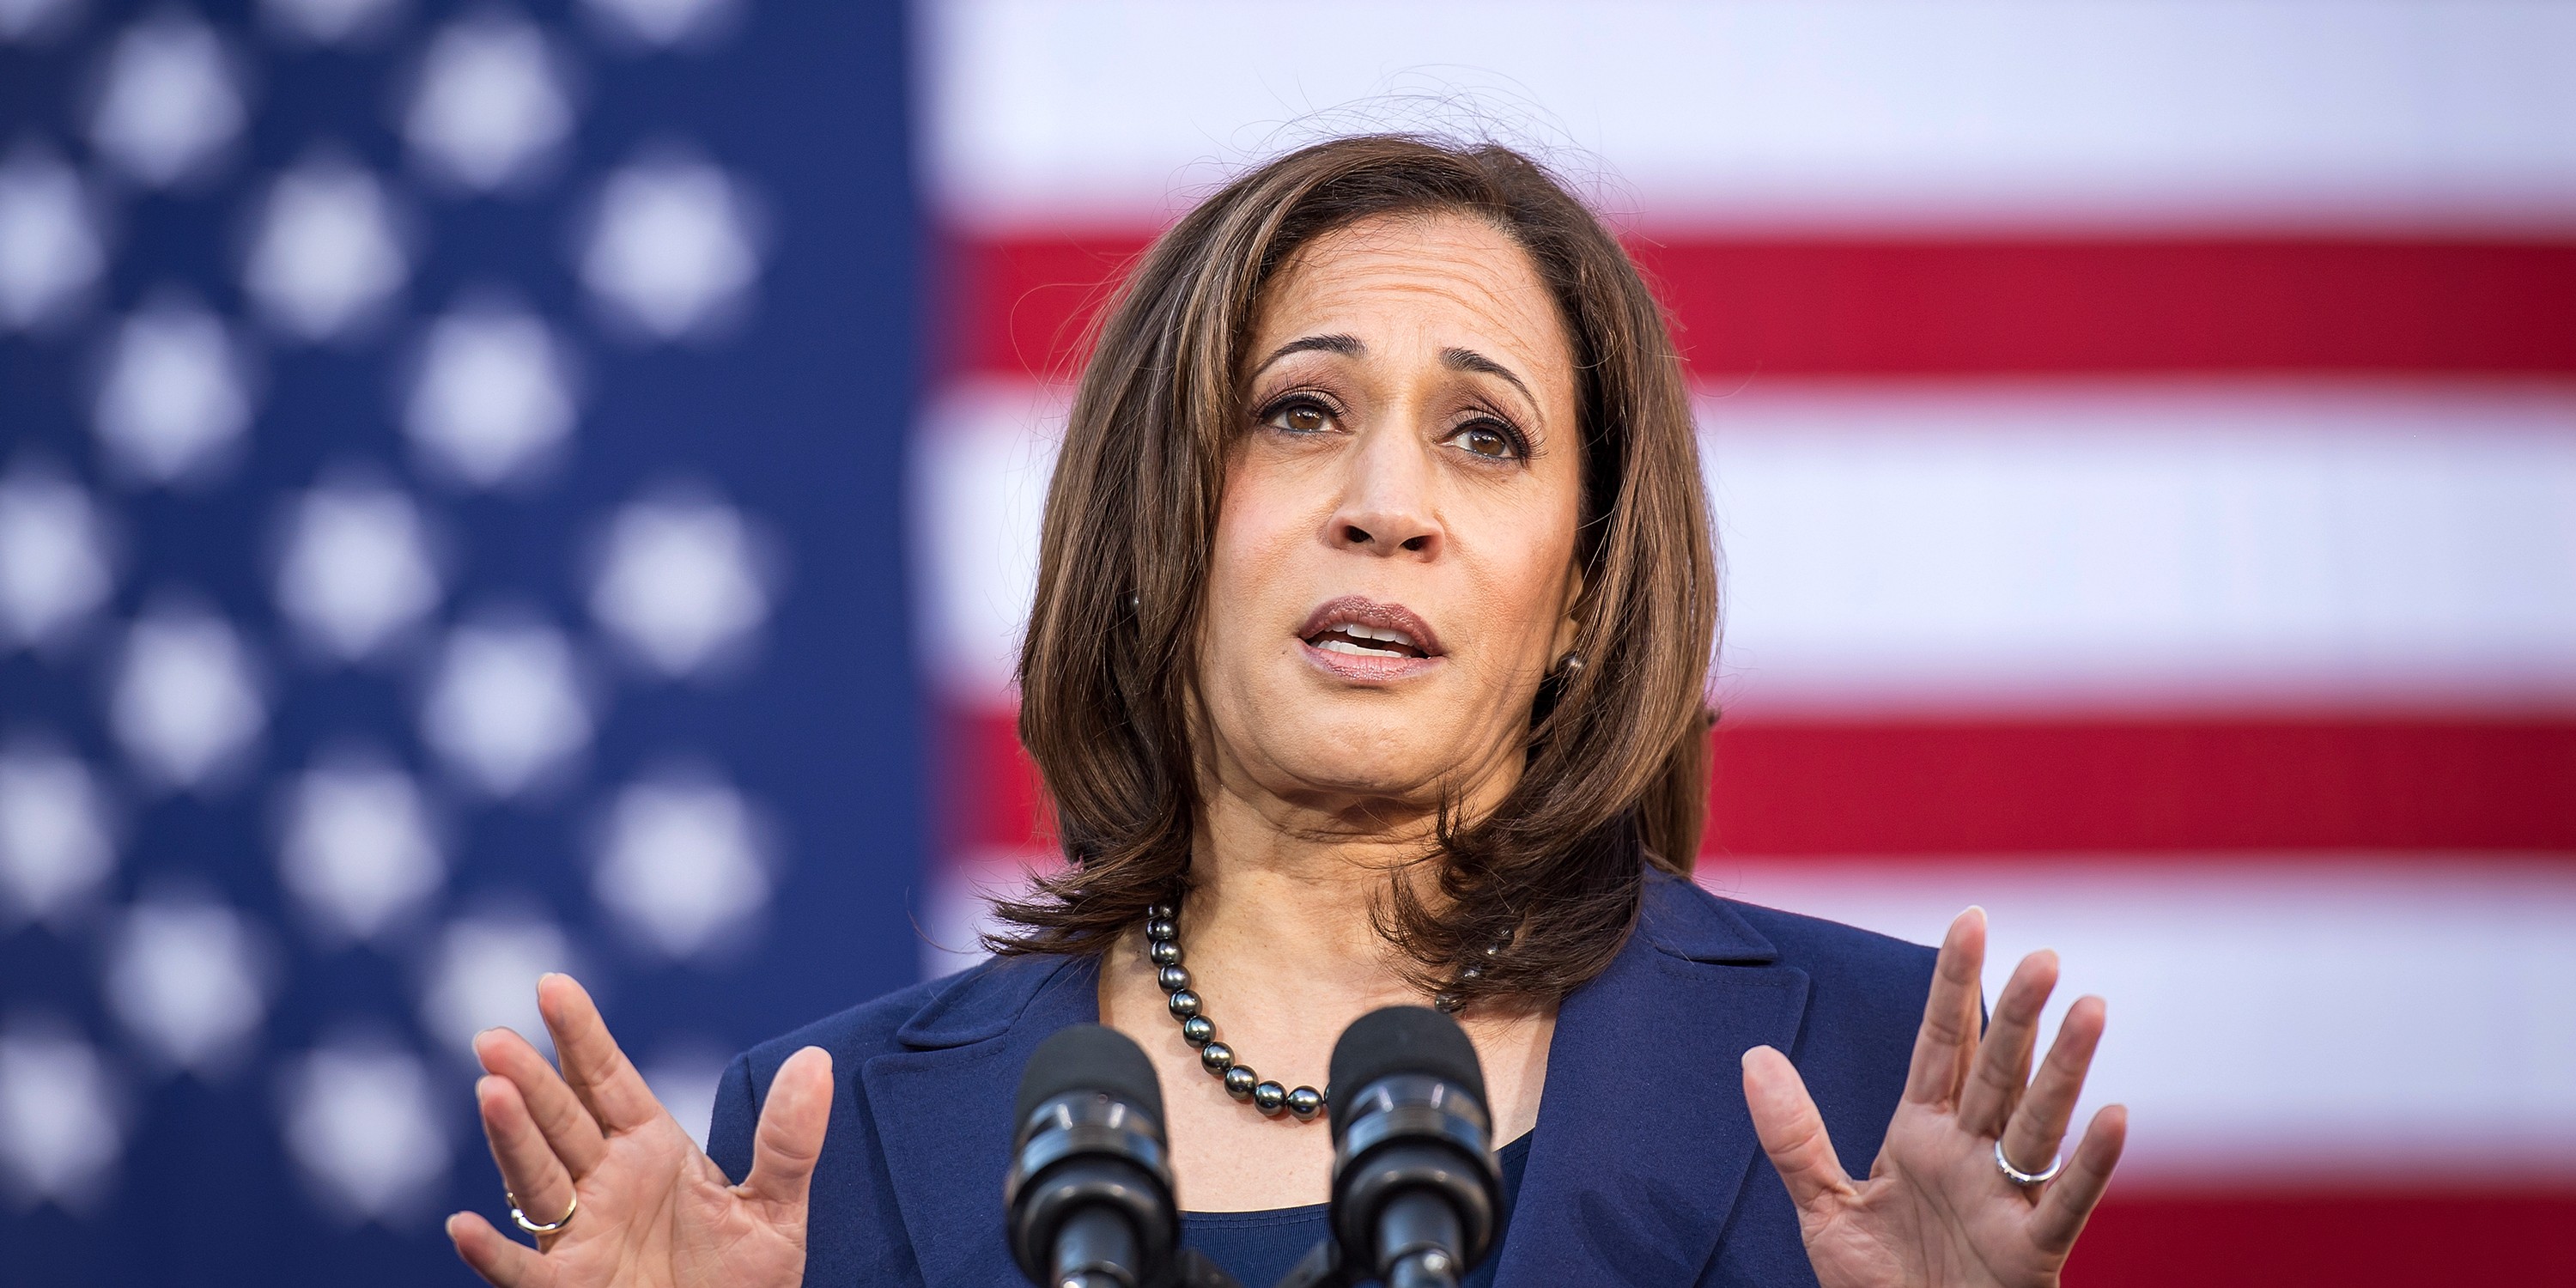 Senator Kamala Harris, a Democrat from California, speaks during an event to launch presidential campaign in Oakland, California, U.S., on Sunday, Jan. 27, 2019. Harris's likely path to the Democratic nomination runs through black voters, who made up a quarter of the primary electorate in 2016 and were critical to nominating Hillary Clinton, as well as to electing Barack Obama in 2008 and 2012. Photographer: David Paul Morris/Bloomberg via Getty Images